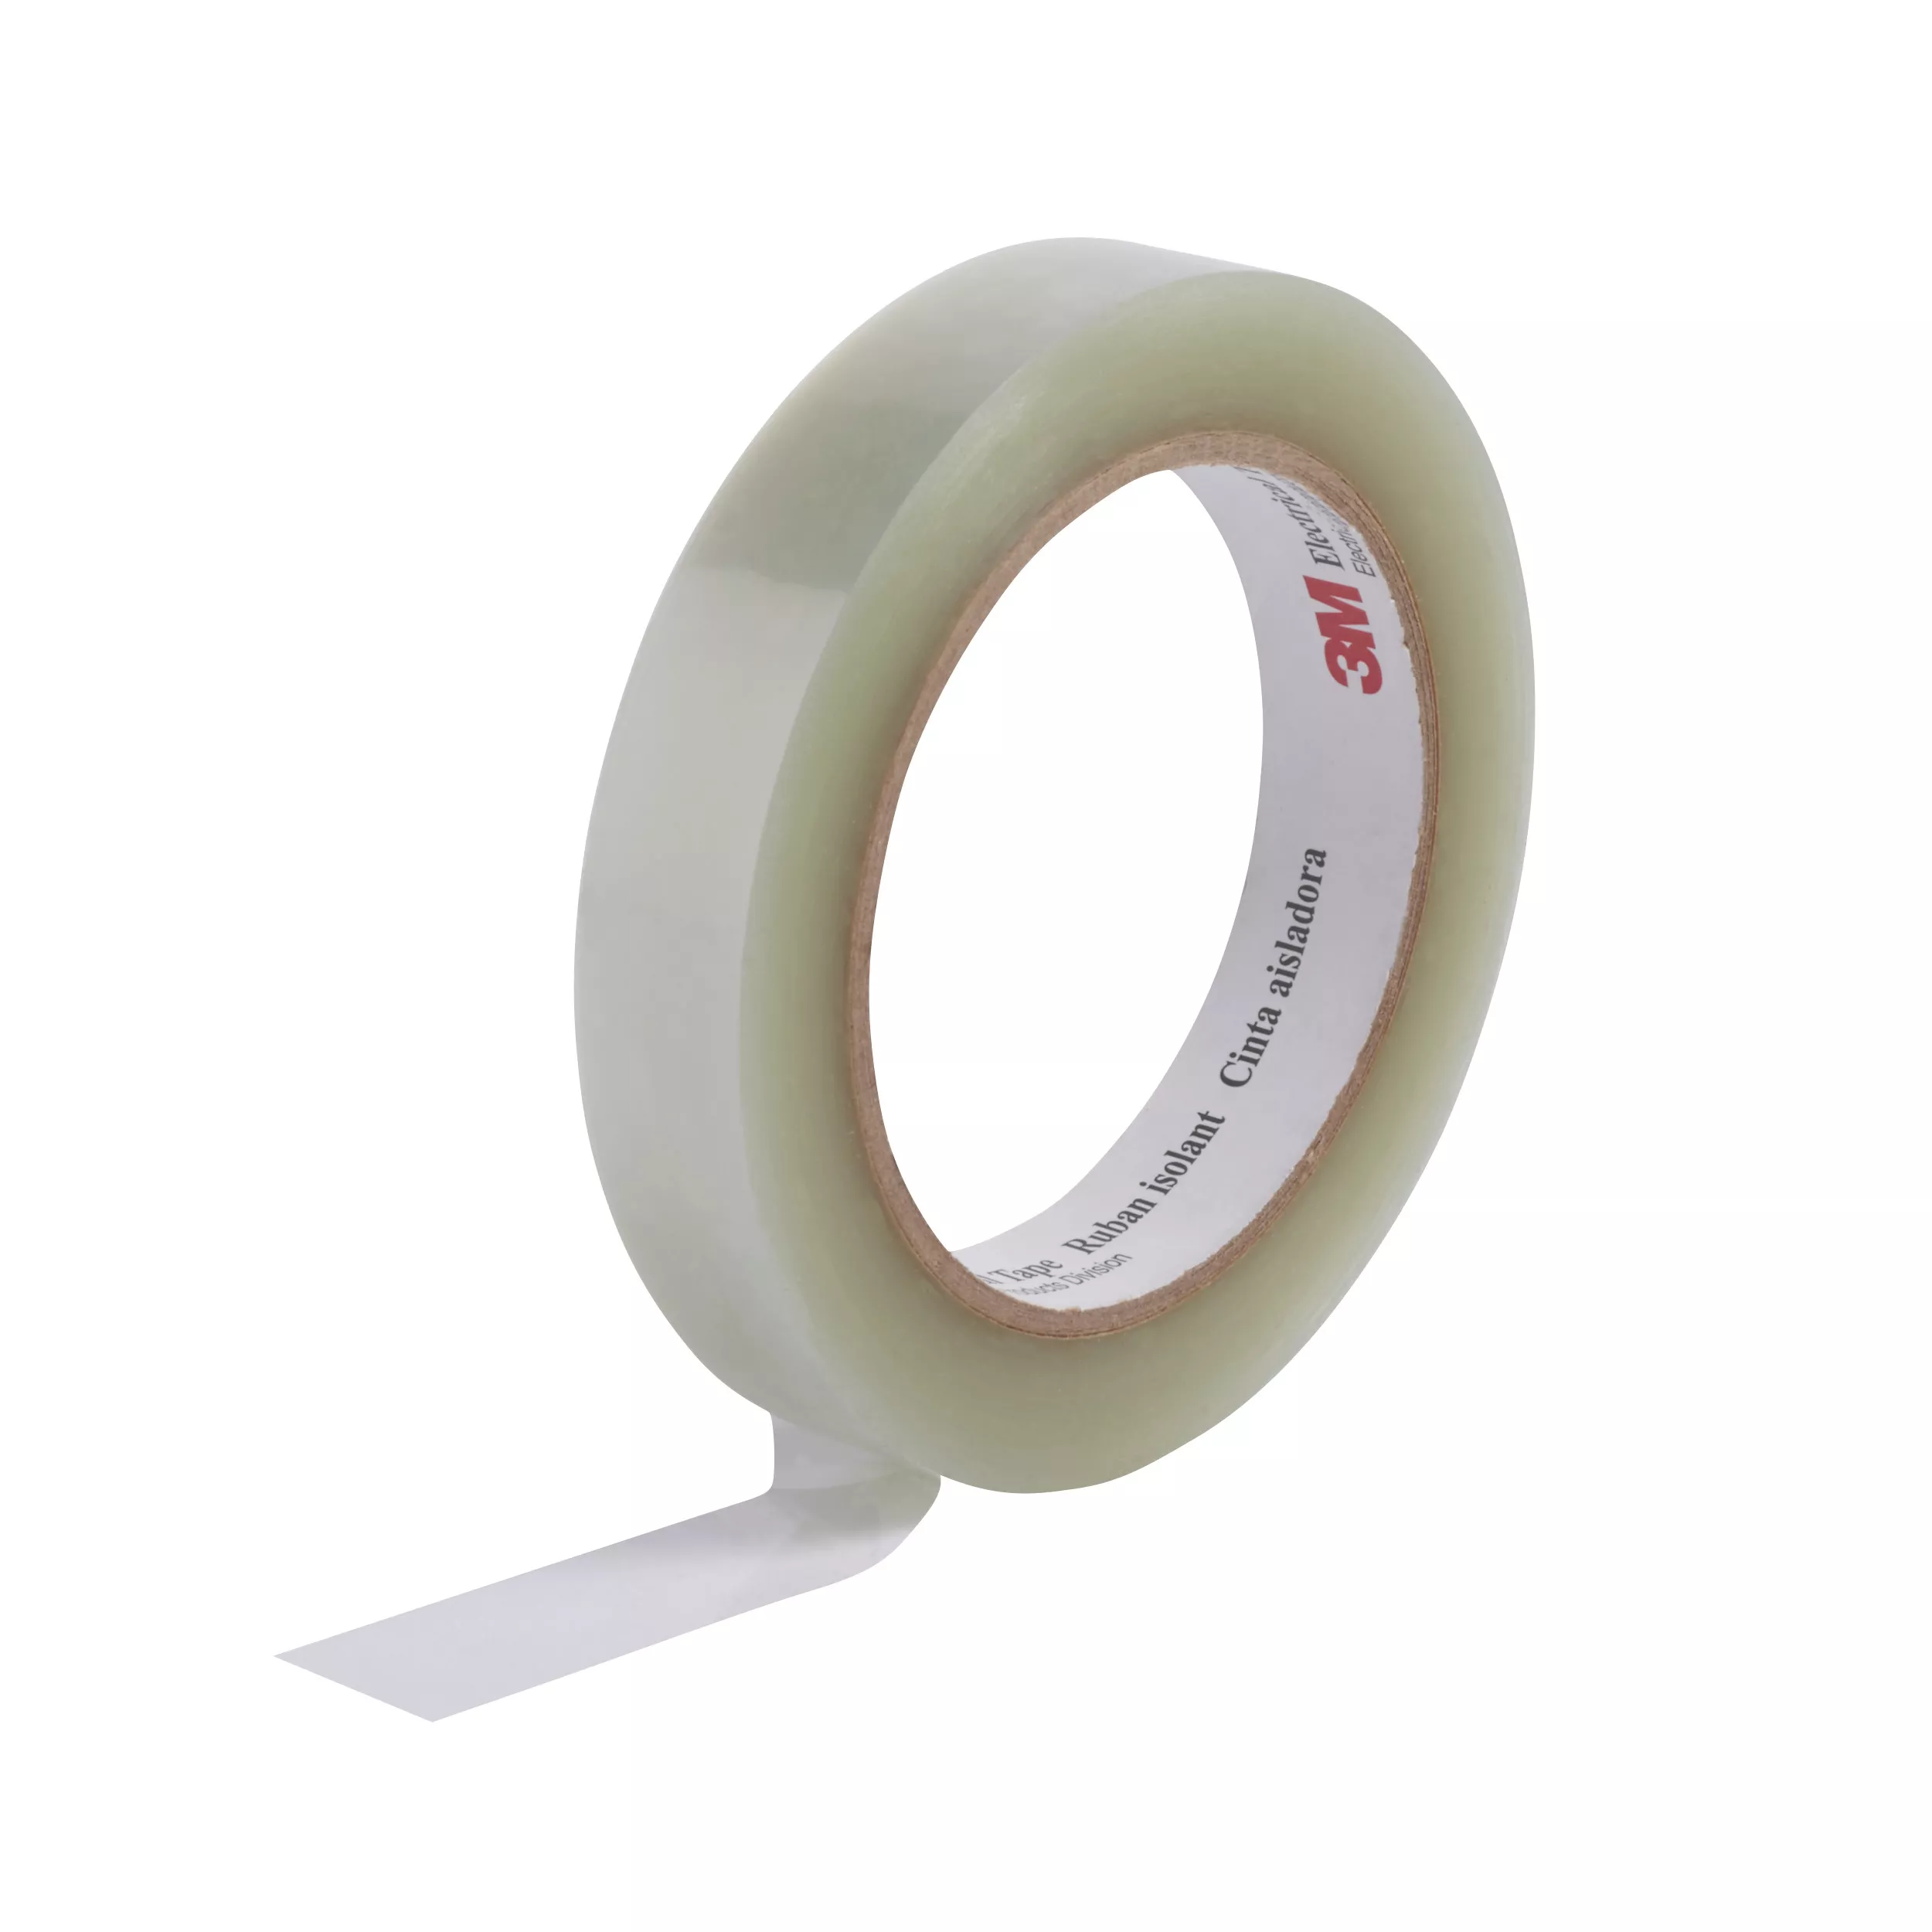 SKU 7010045092 | 3M™ Polyester Film Electrical Tape 5